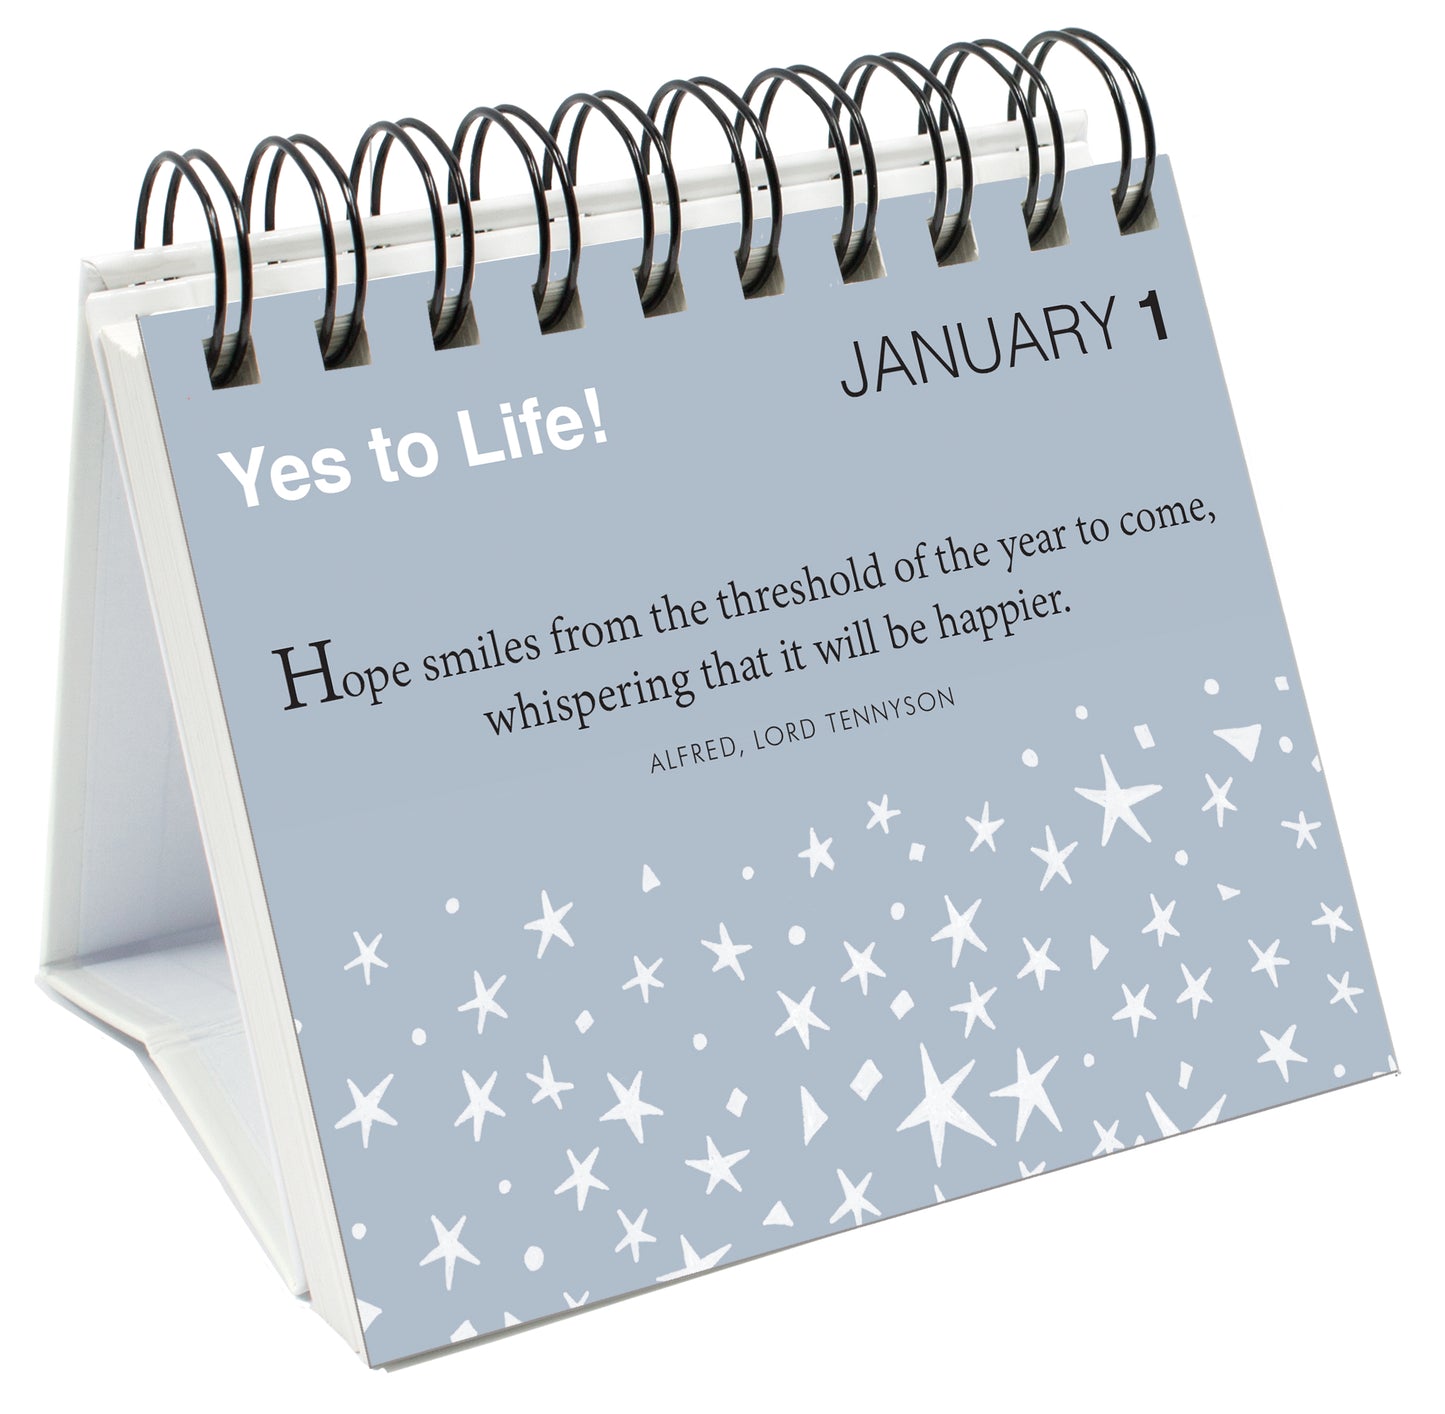 365 Yes to Life! - A positive thought for each day